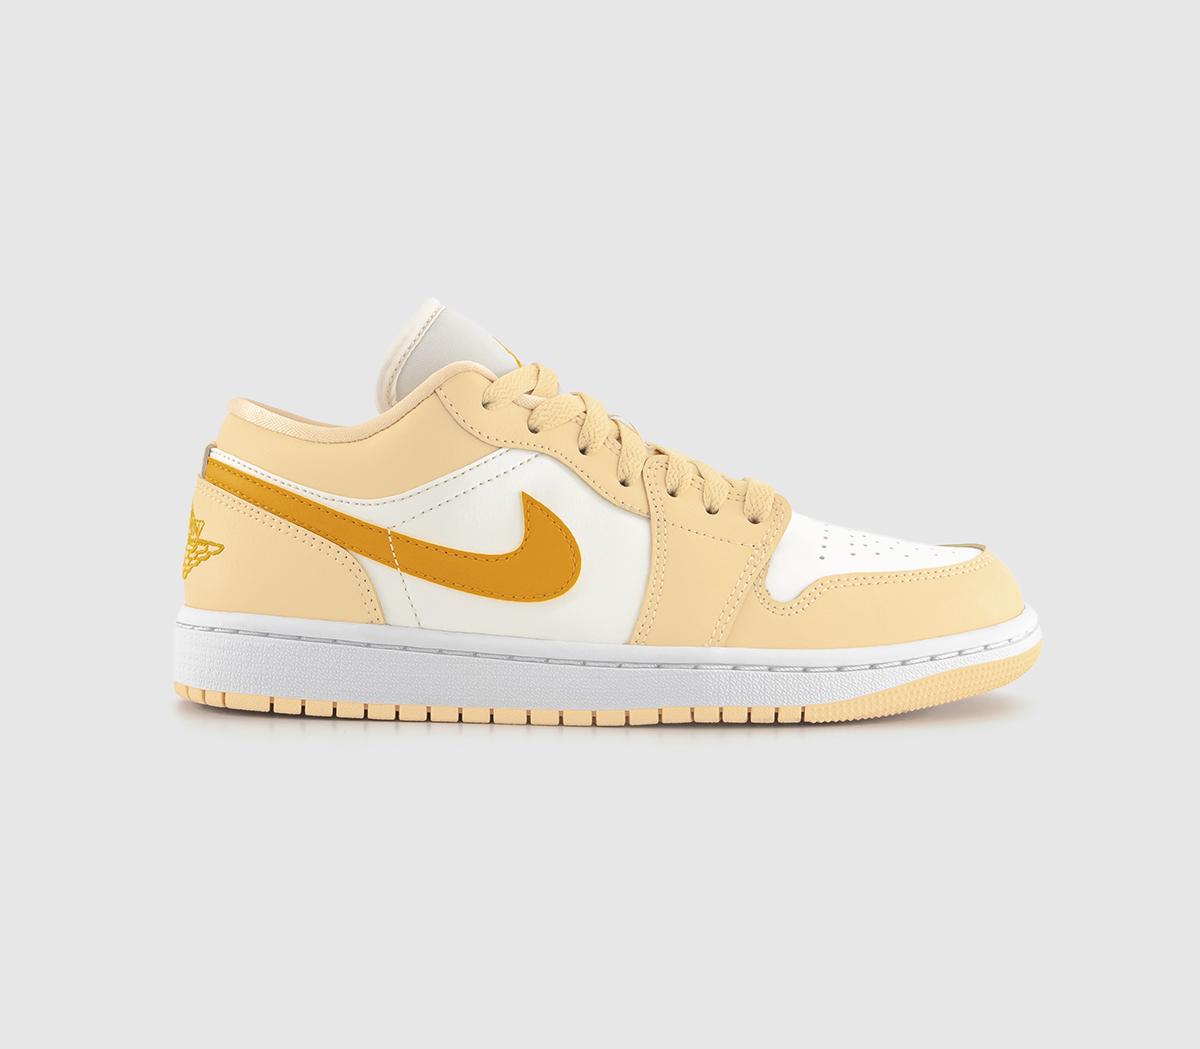 Air 1 Low Trainers Sail Yellow Ochre Pale Vanilla White